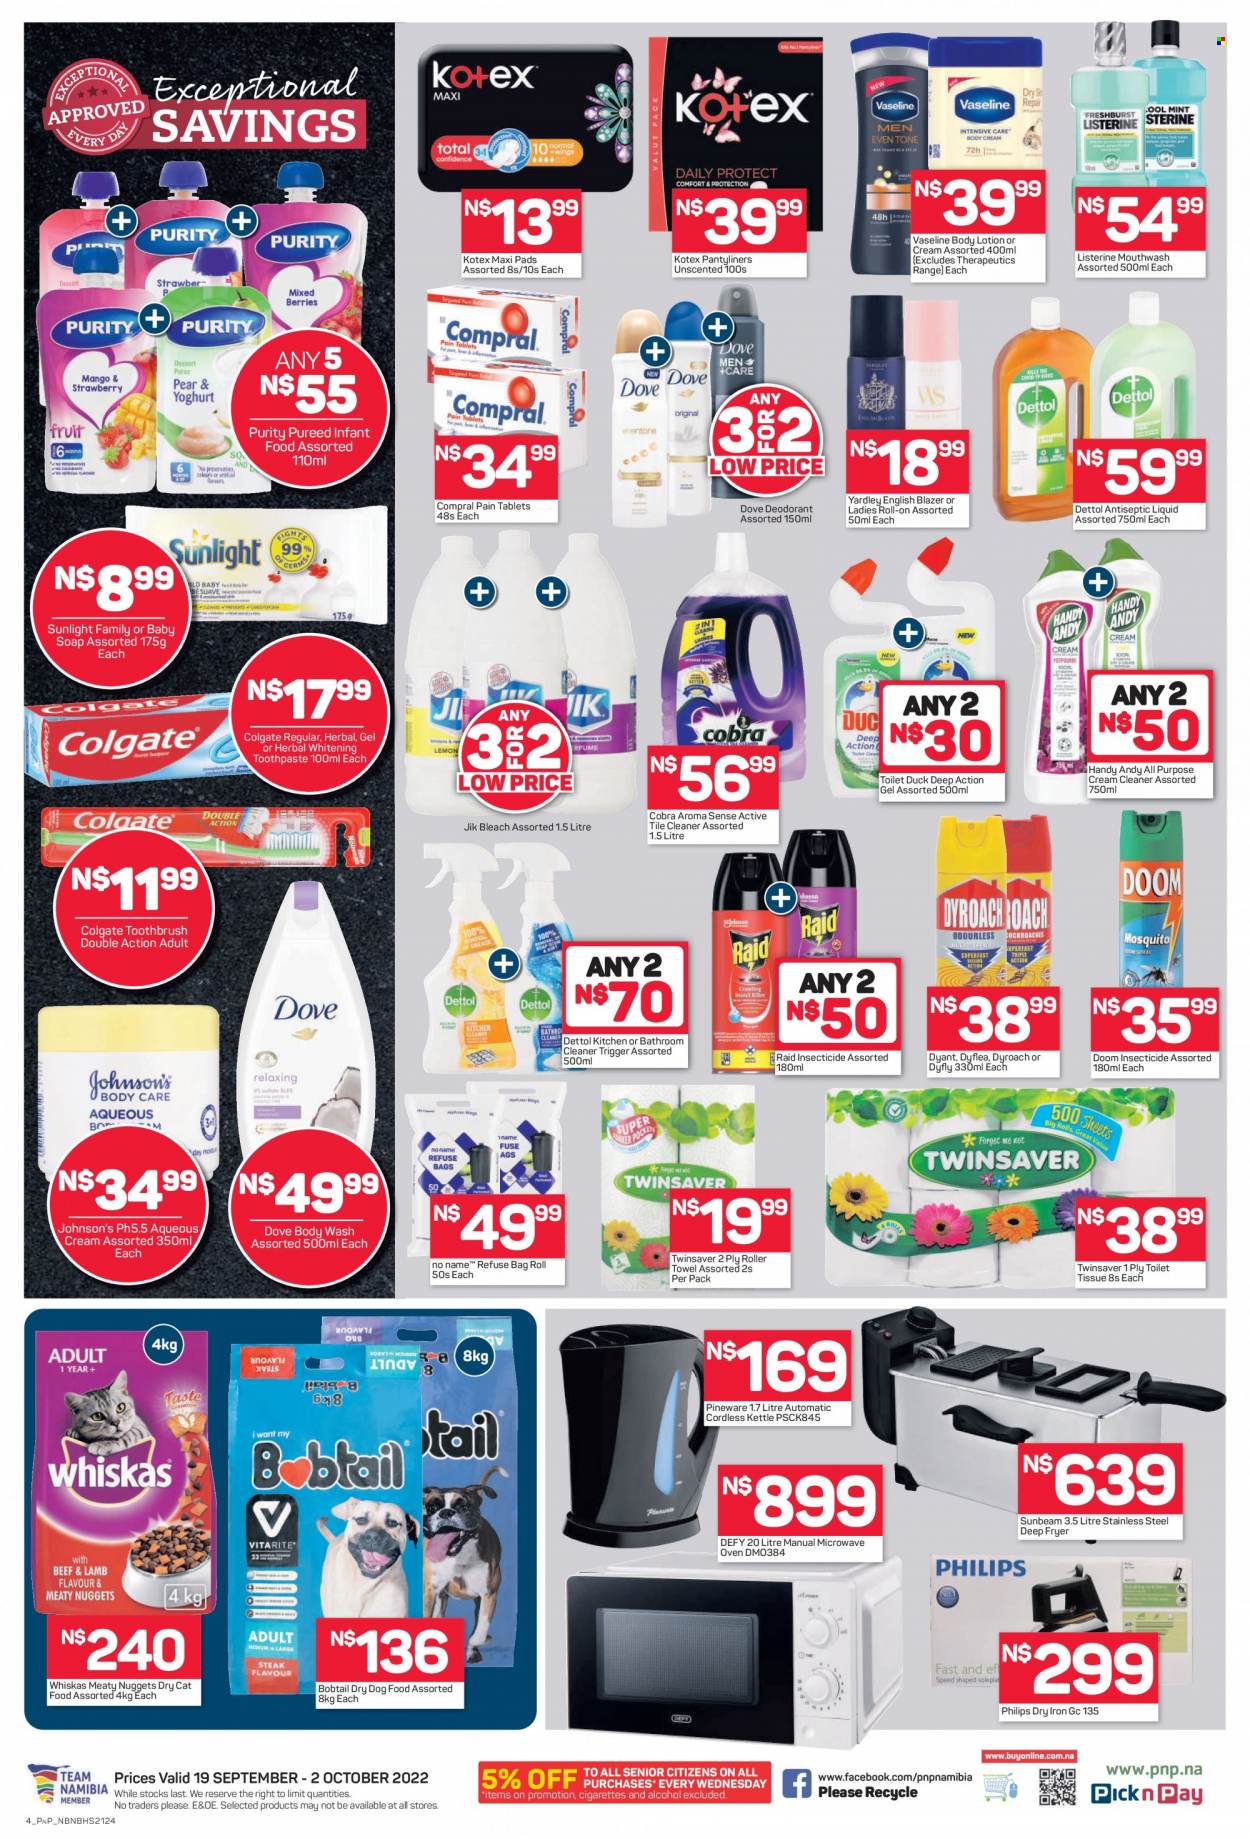 thumbnail - Pick n Pay catalogue  - 19/09/2022 - 02/10/2022 - Sales products - Dove, alcohol, Purity, Johnson's, Dettol, cream cleaner, bleach, cleaner, Sunlight, body wash, Vaseline, soap, Colgate, Listerine, toothbrush, toothpaste, mouthwash, sanitary pads, Kotex, pantyliners, body lotion, insecticide, Raid, Philips, animal food, cat food, dog food, Whiskas, dry dog food, dry cat food. Page 2.